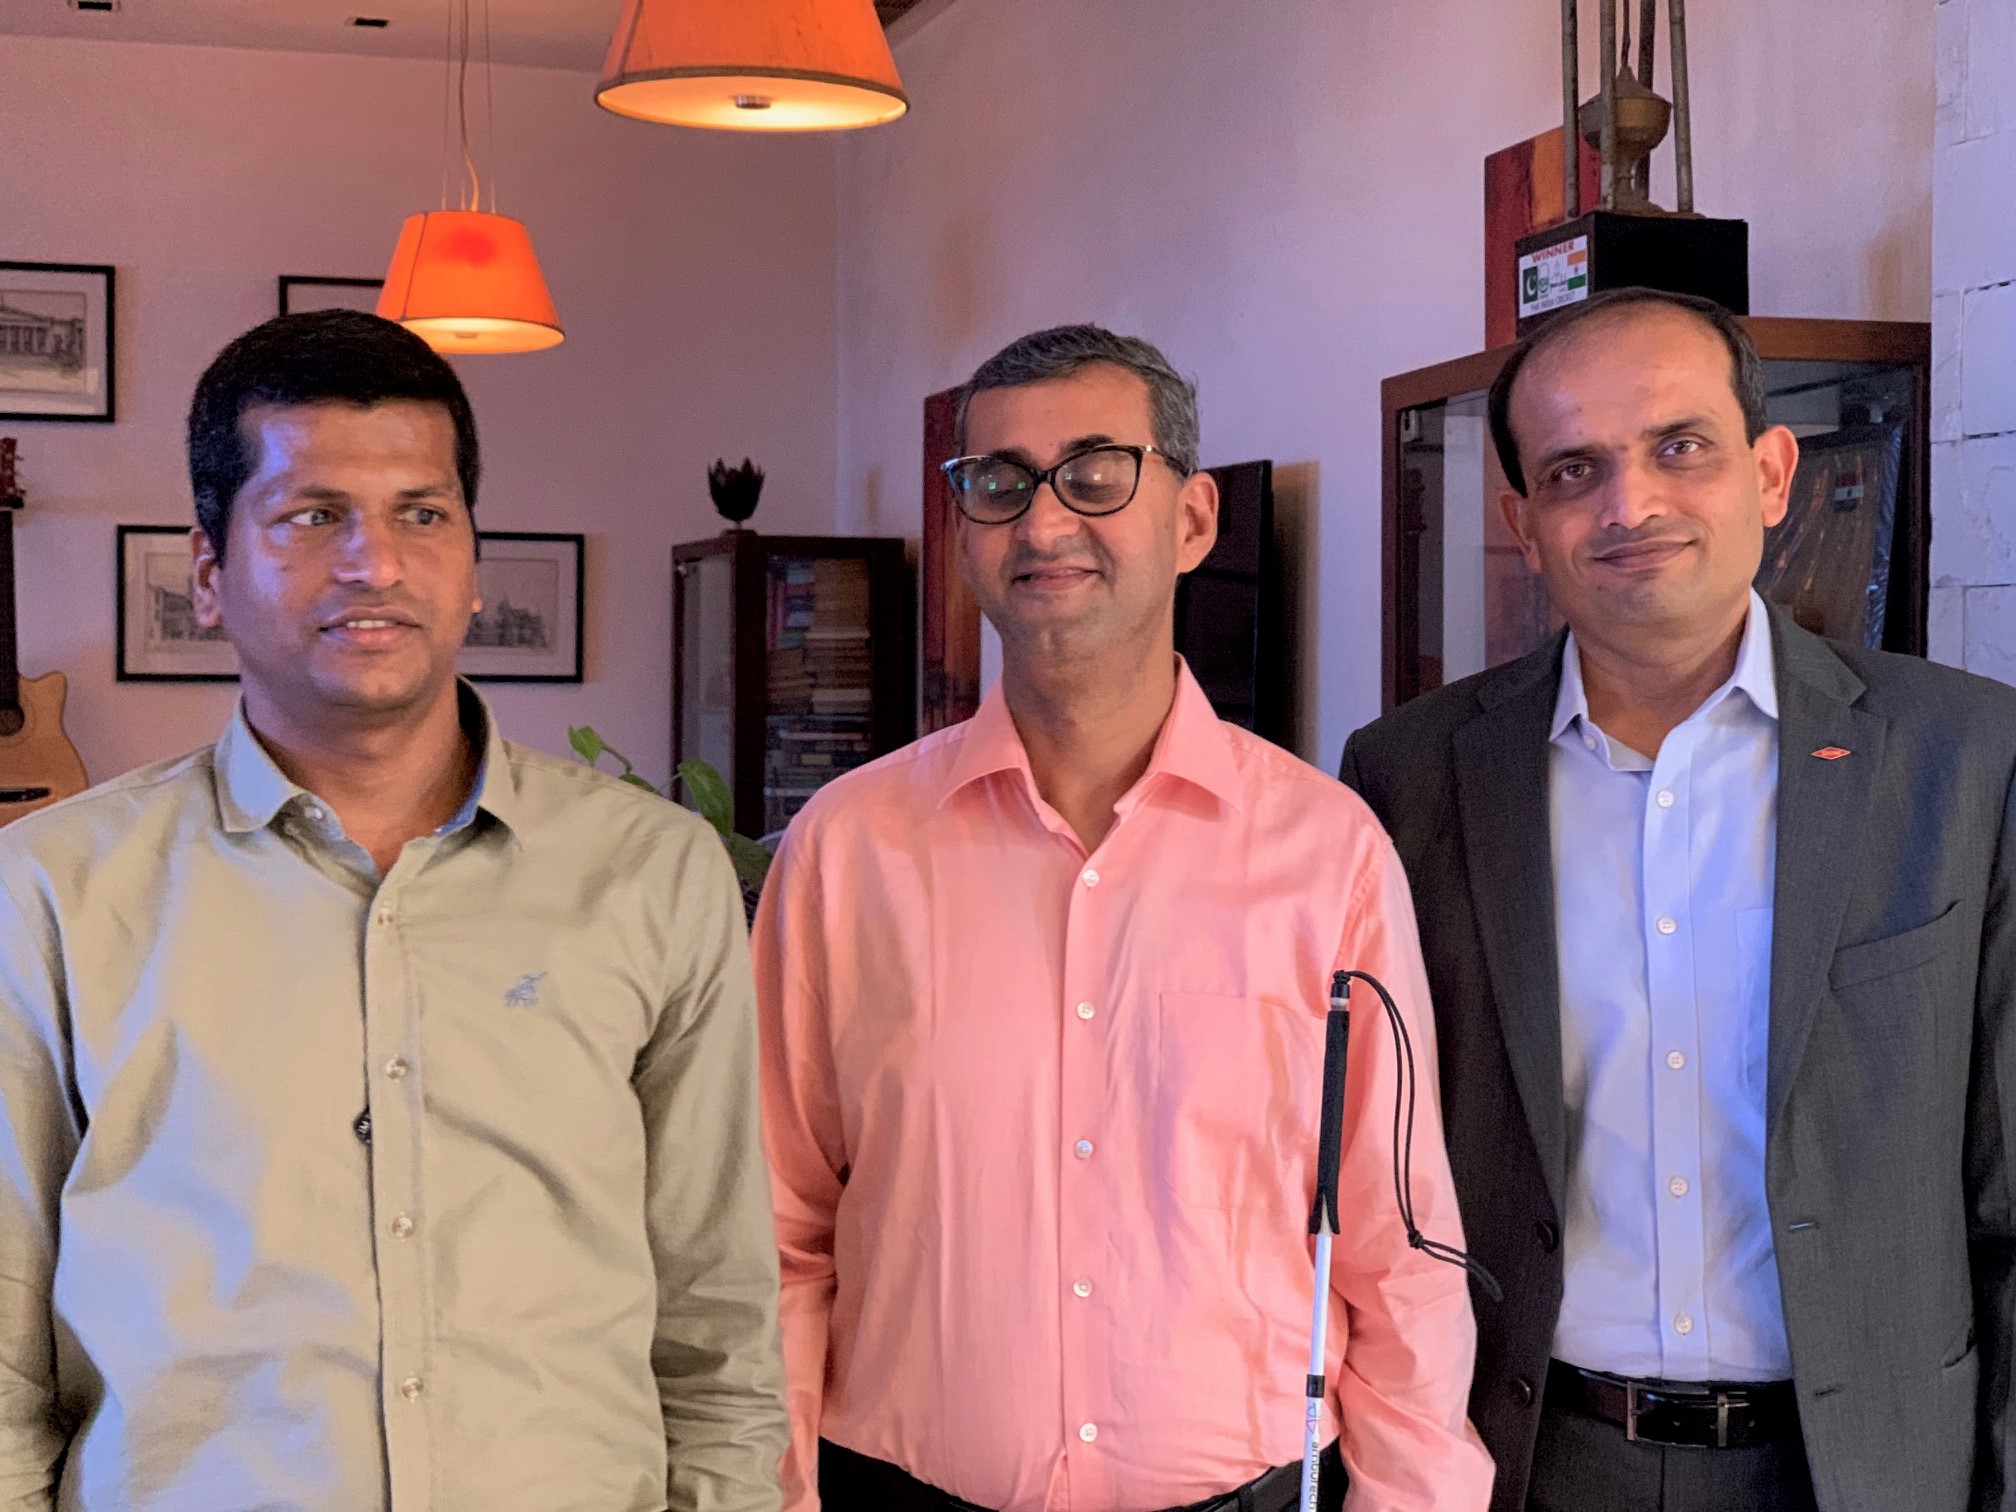 Left to right in the photograph: A) Ekinath Khedekar—Senior Manager, Reliance Power B) Divyanshu Ganatra, Founder and Chairman, ABBF C) Sudhir Shenoy—Country President & CEO of Dow Chemical International Private Limited, India -Photo By Sachin Murdeshwar GPN